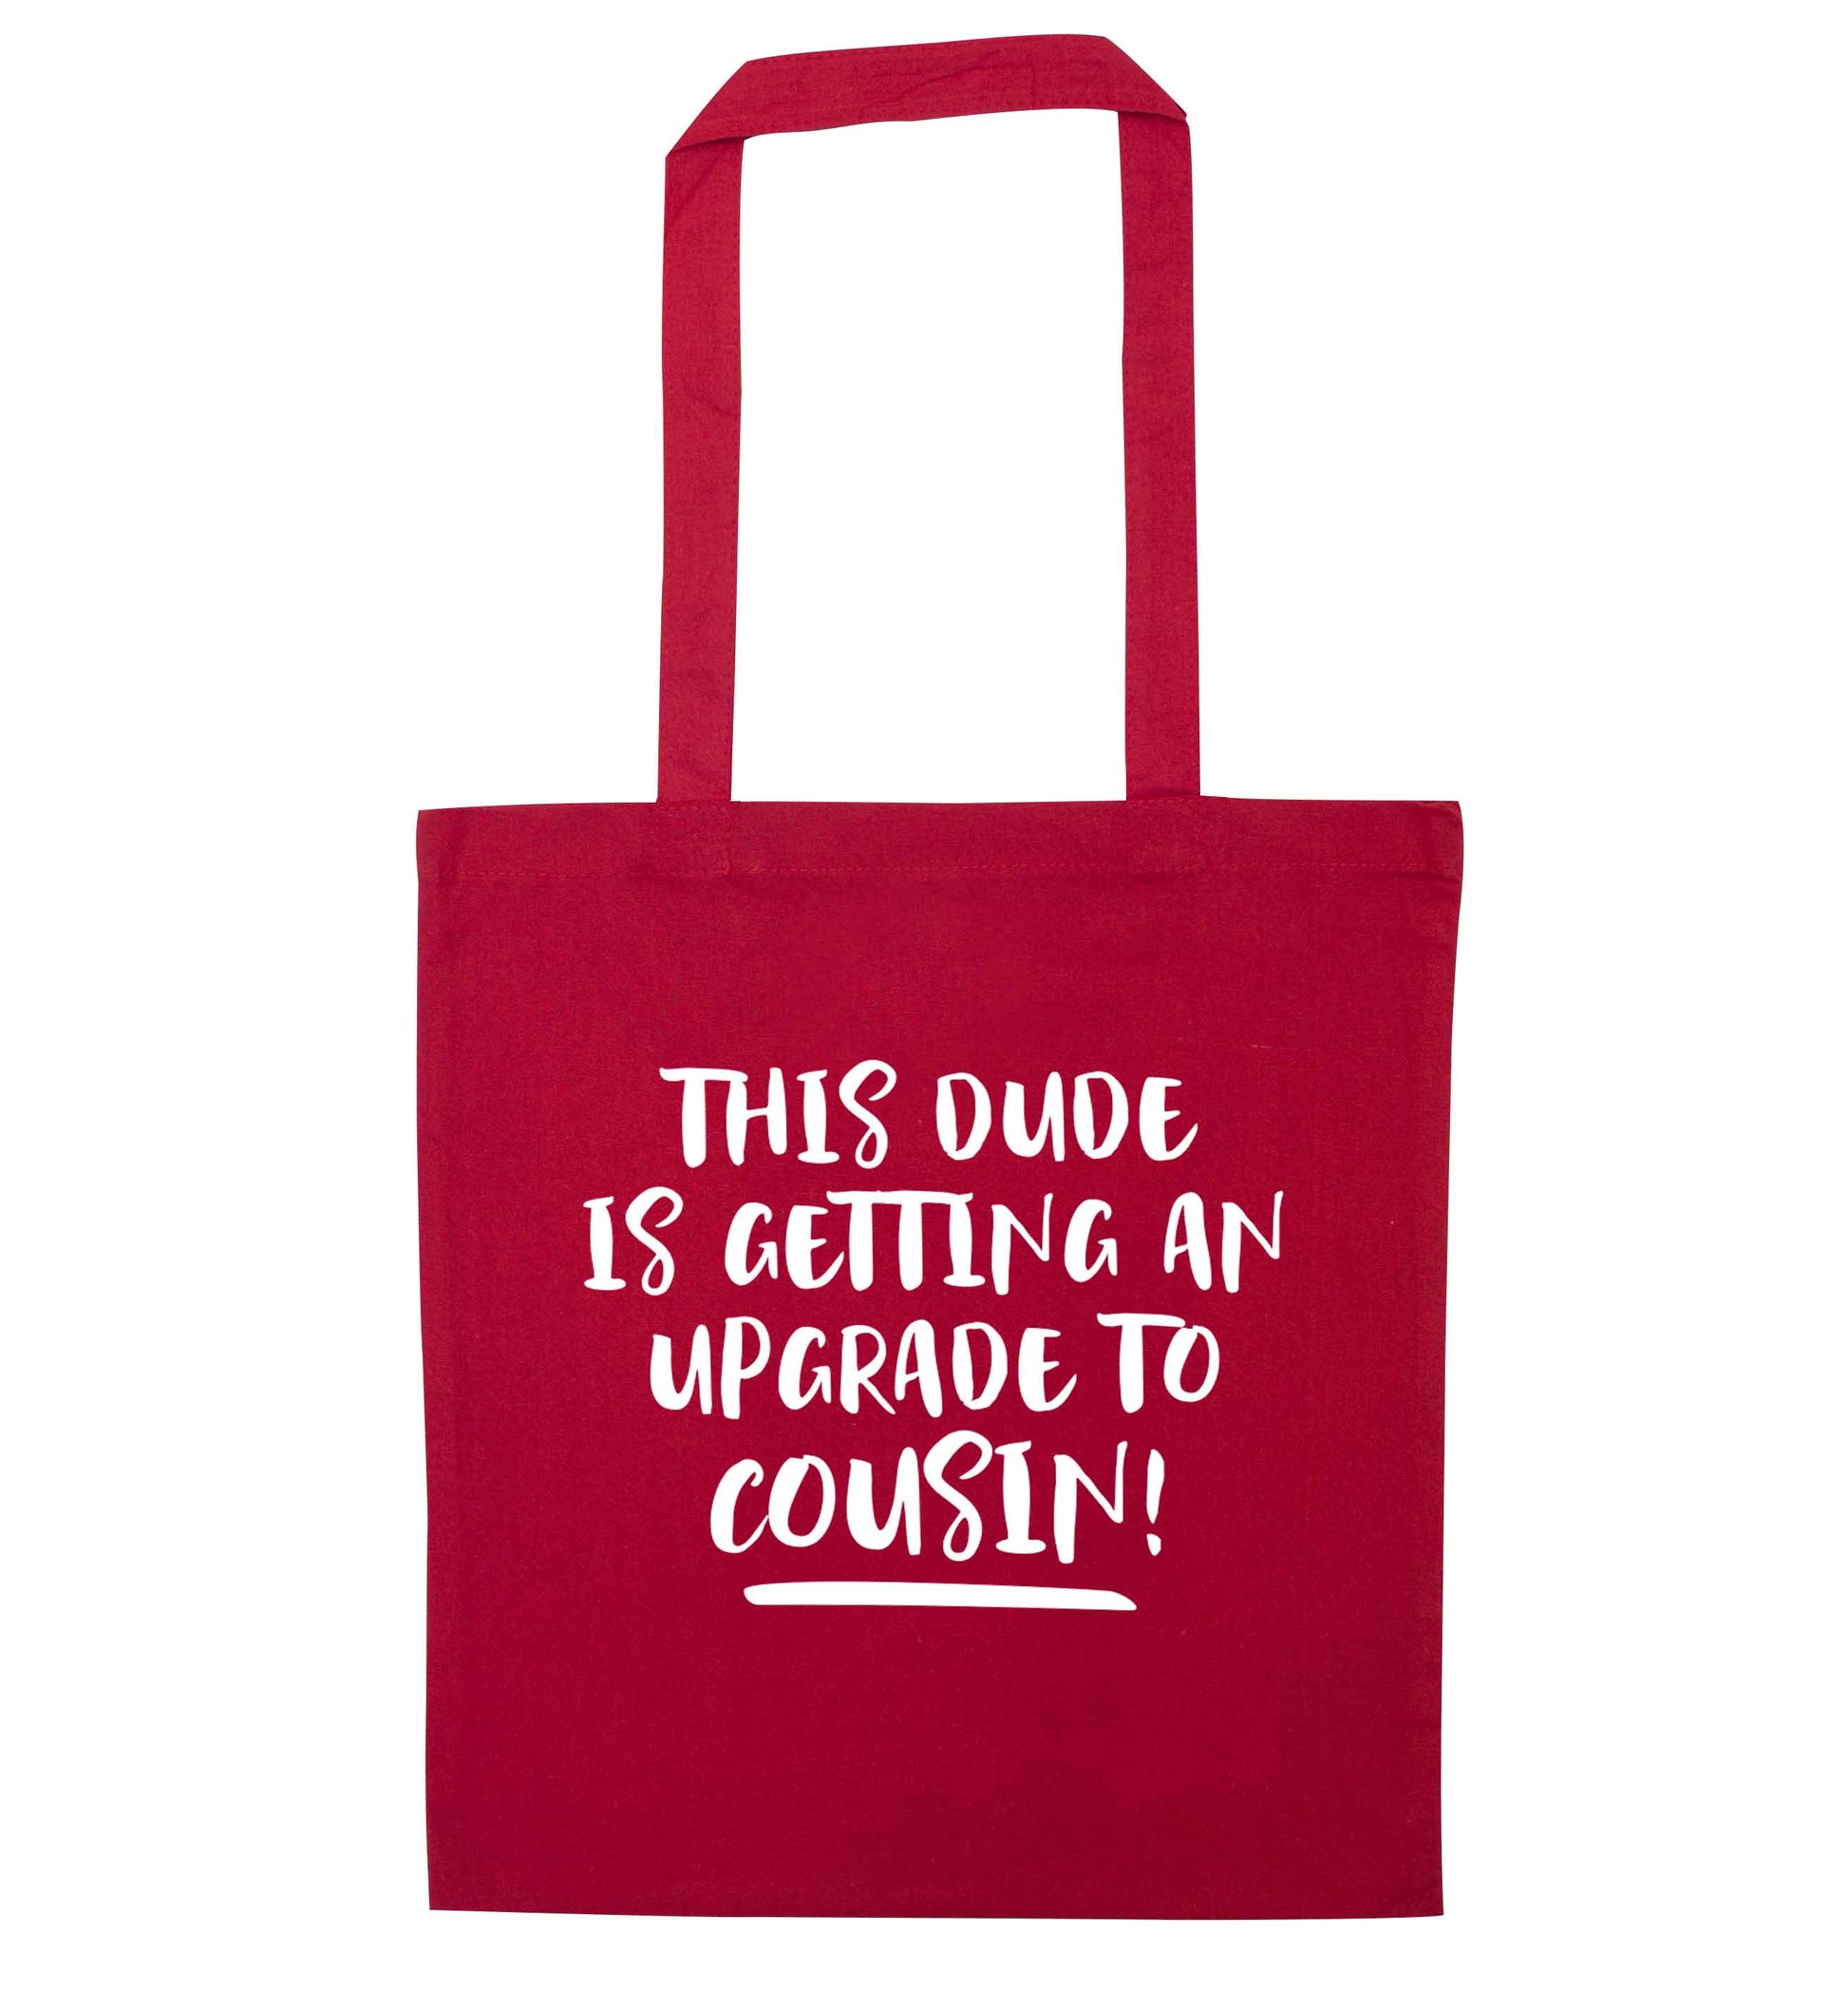 This dude is getting an upgrade to cousin! red tote bag